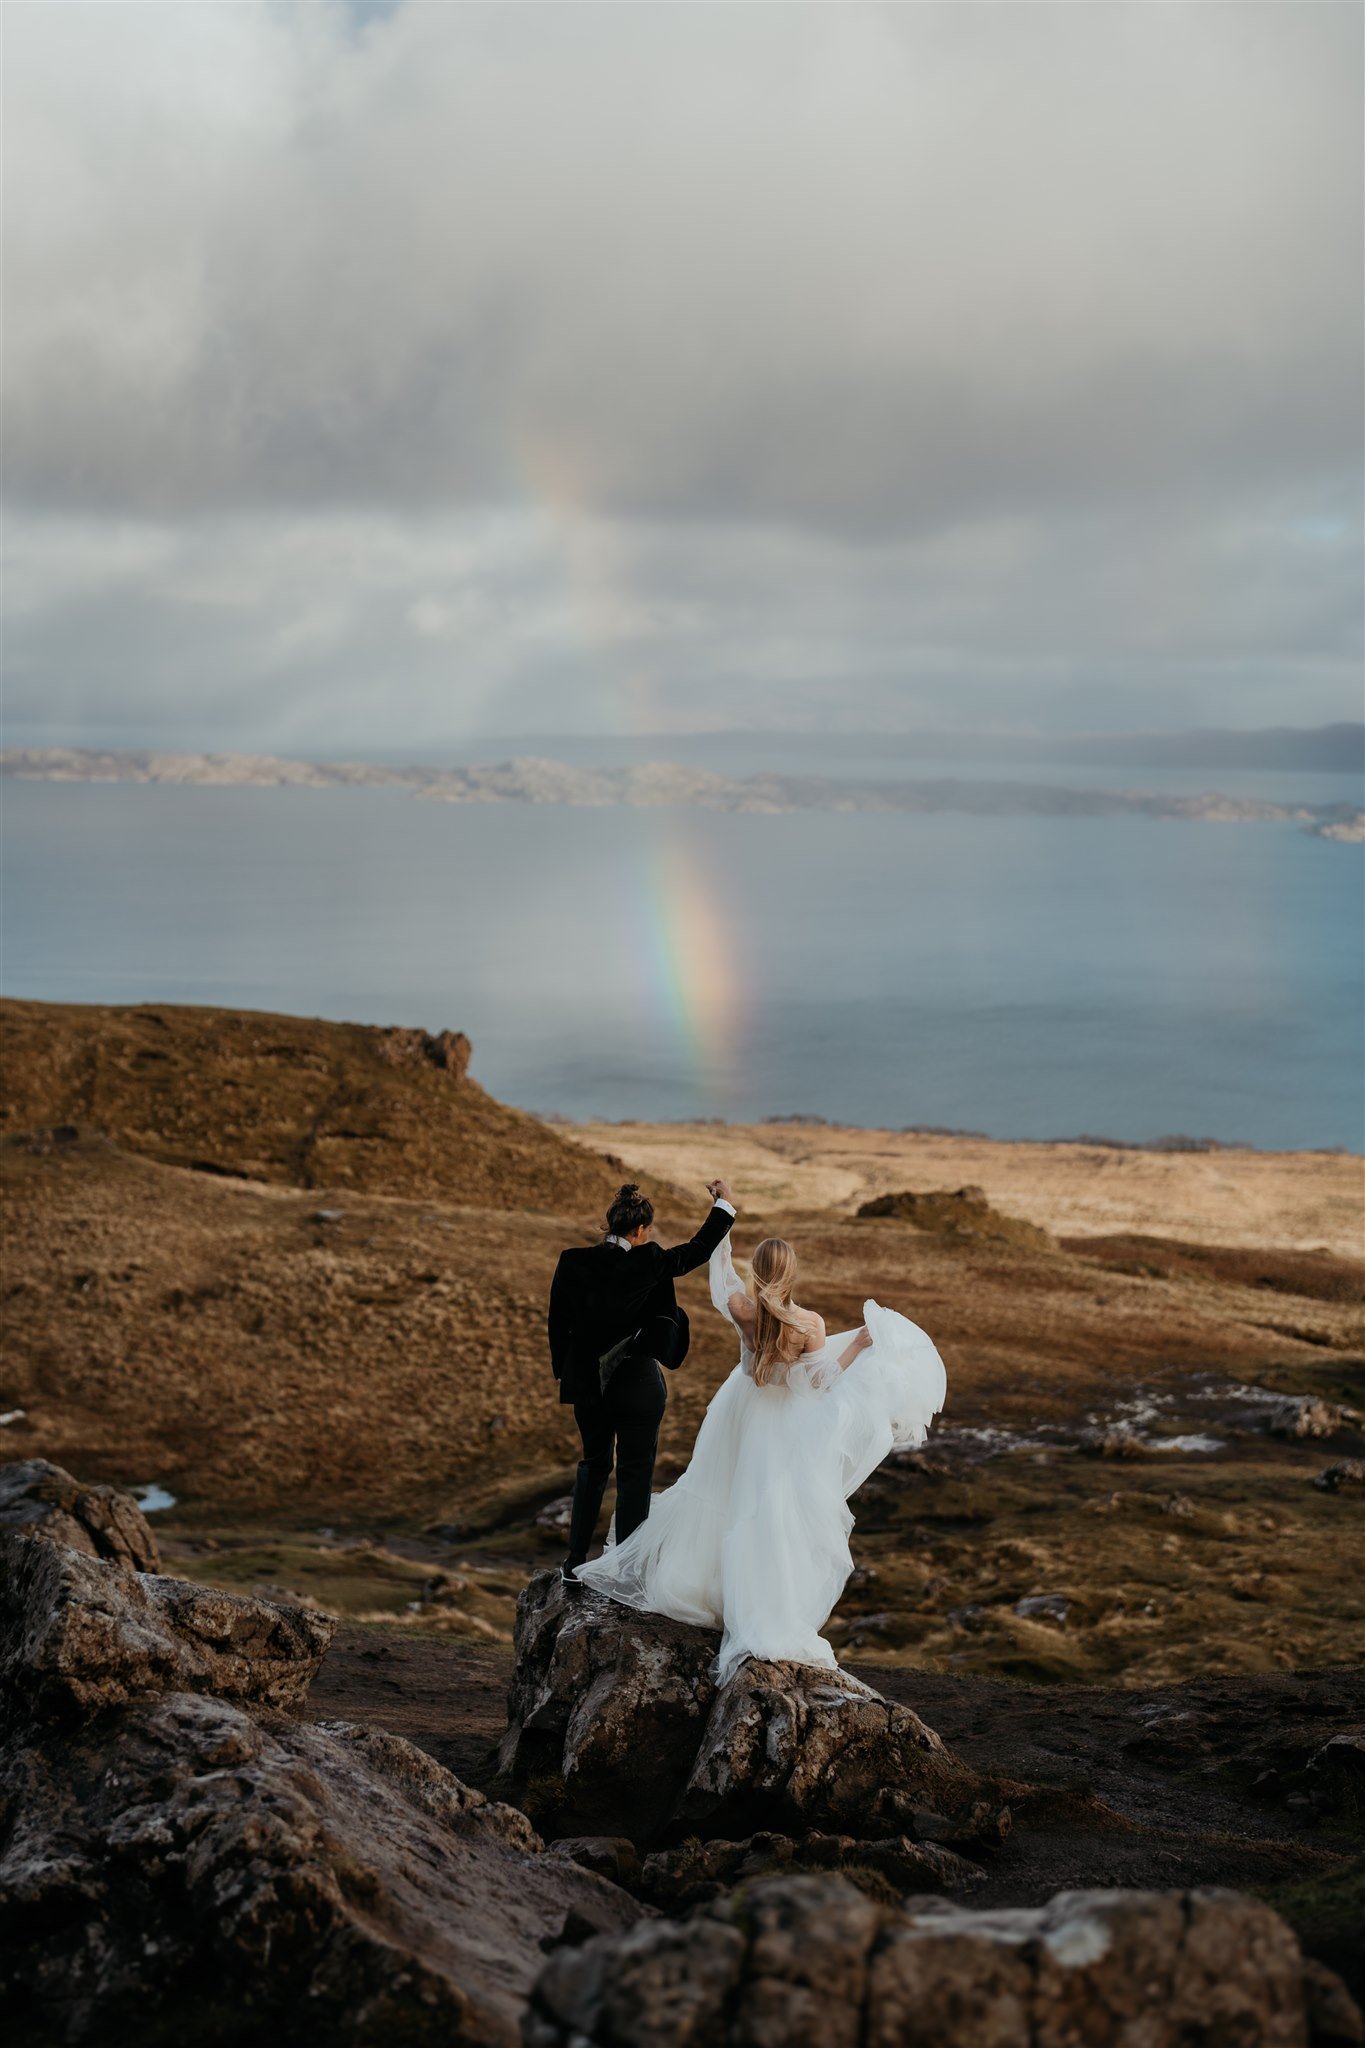 Brides cheer with a rainbow shining in the background at their Isle of Skye elopement